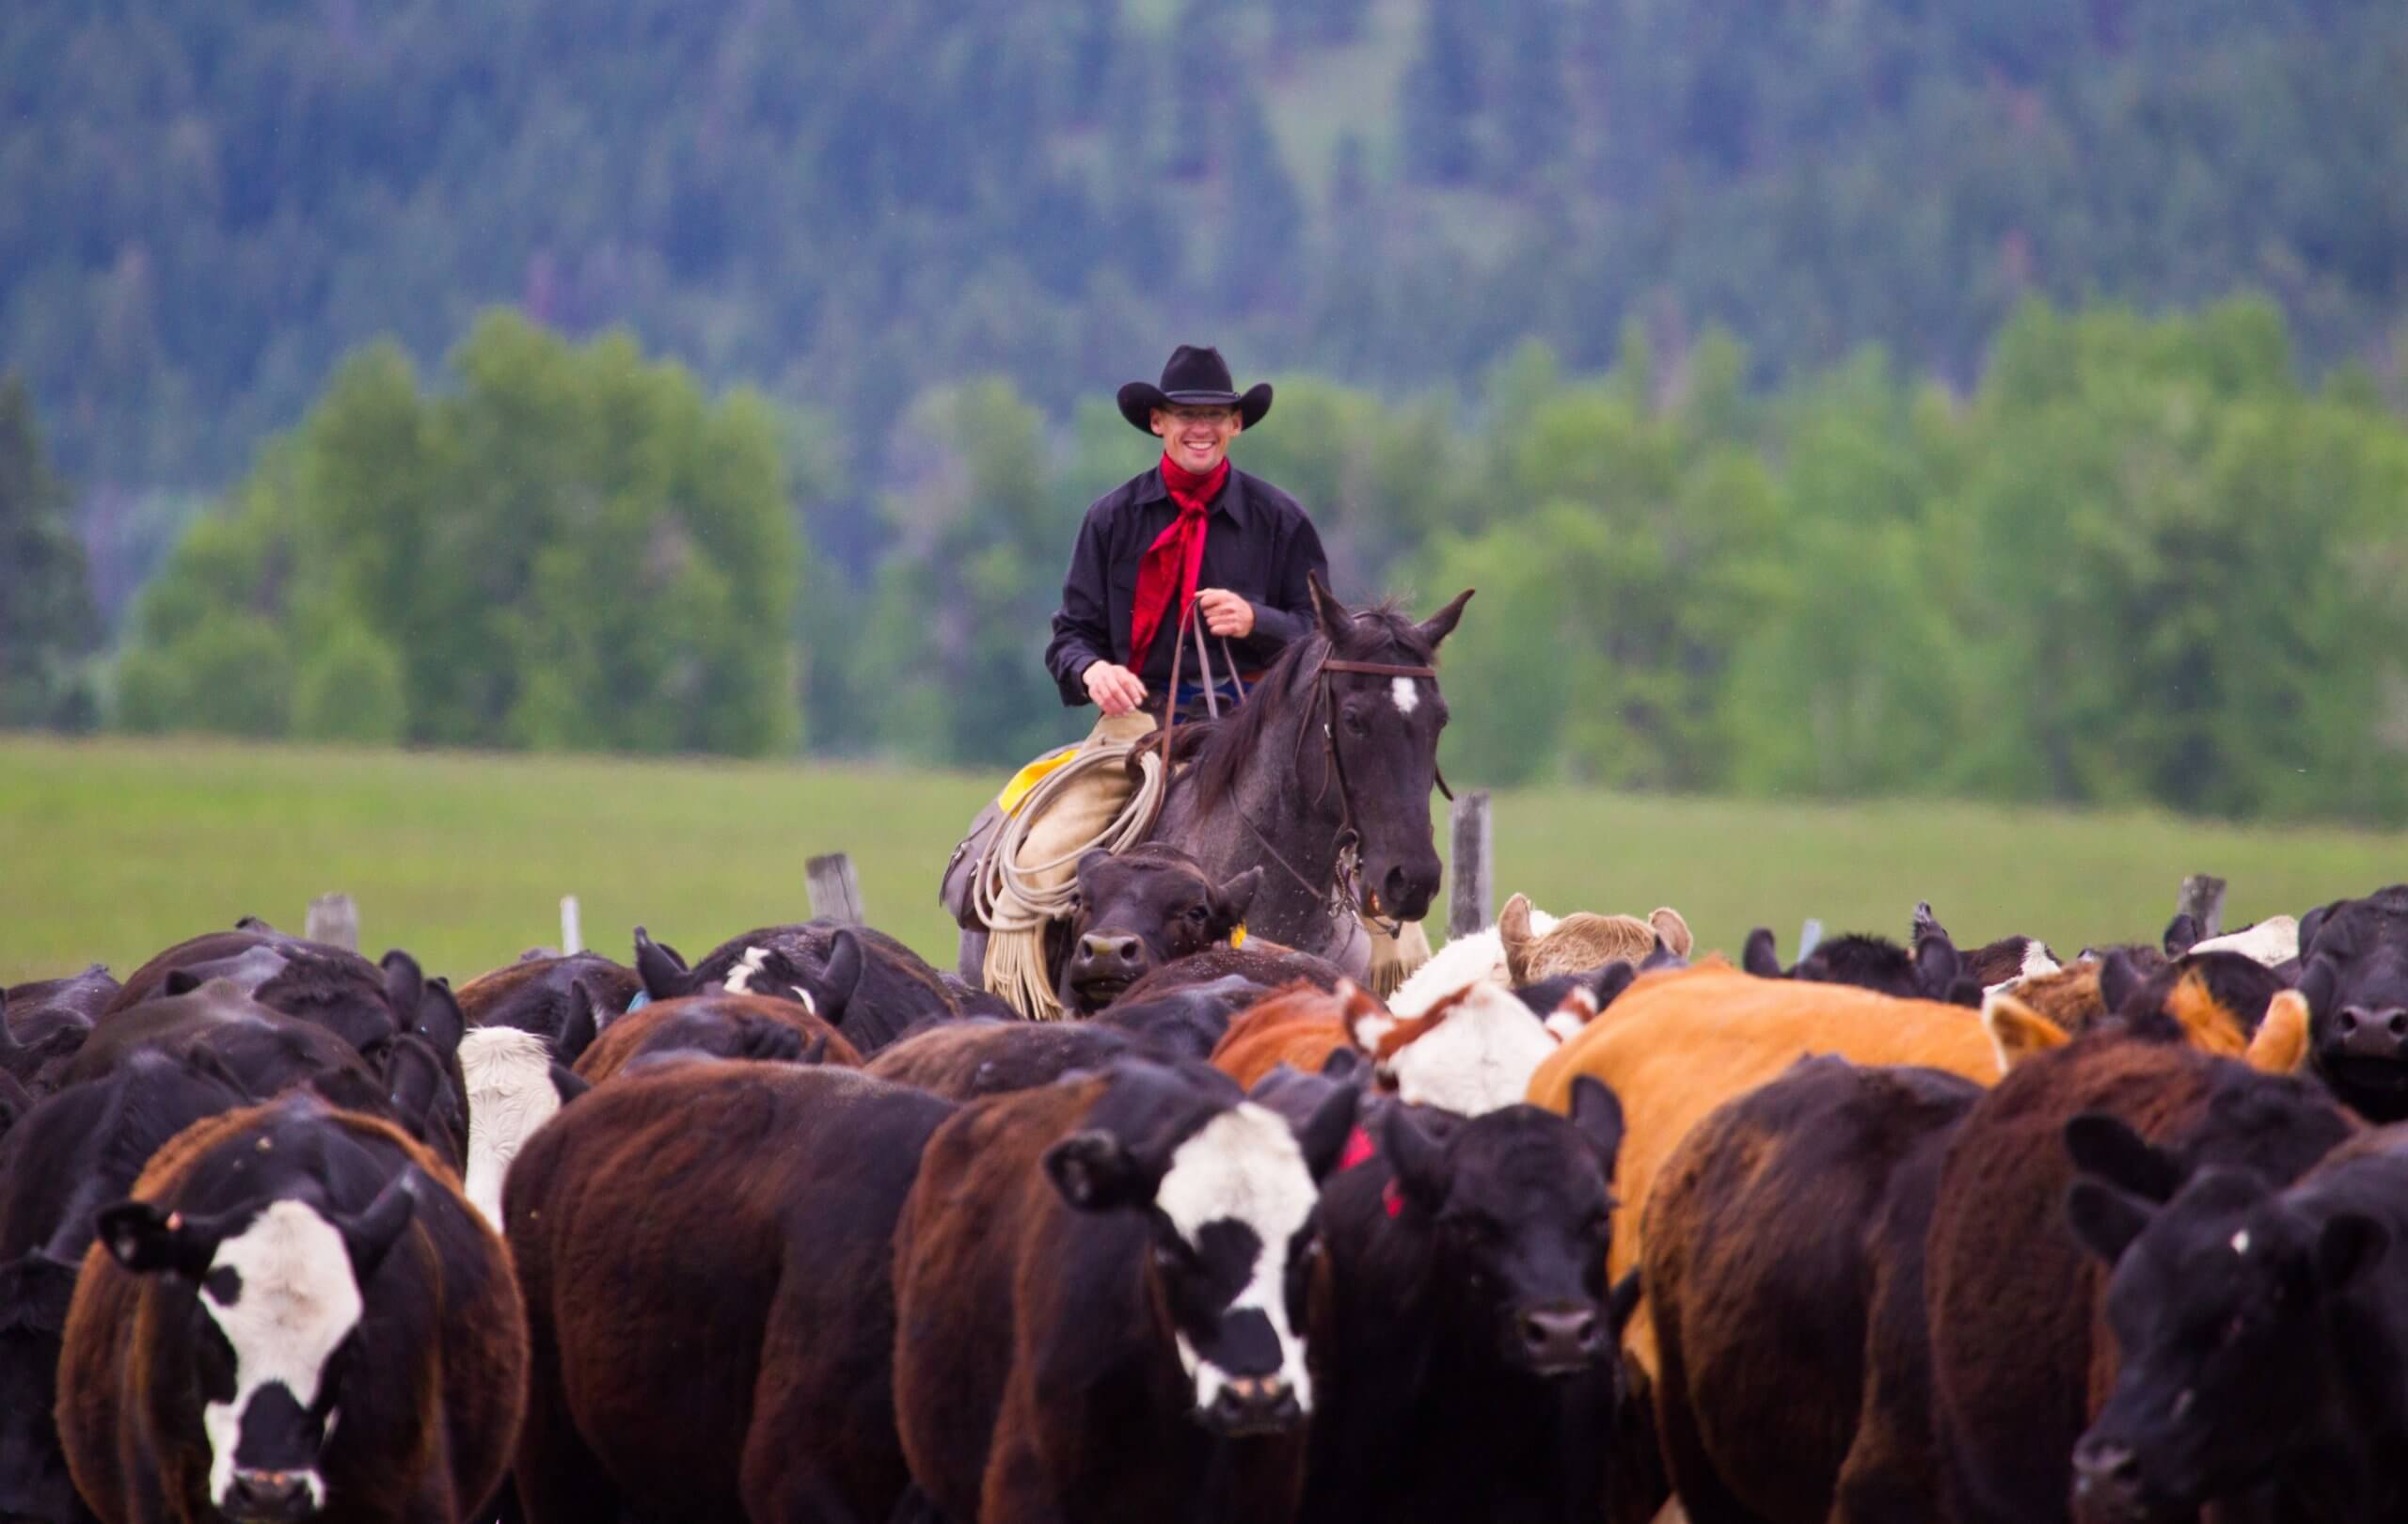 Guests riding horses and moving cattle during the cattle drive across the open field amongst the mountains.